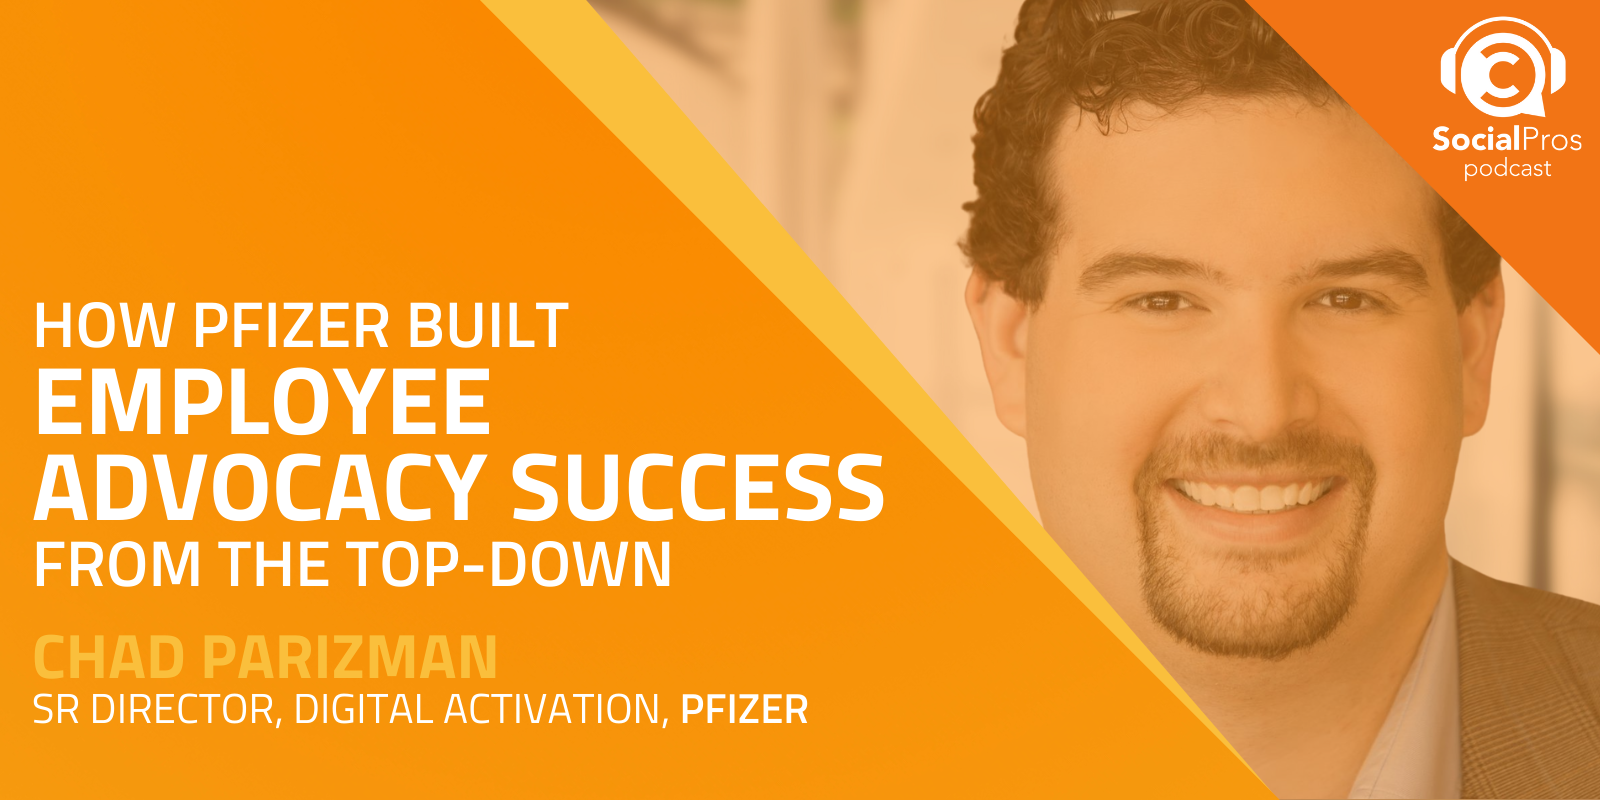 How Pfizer Built Employee Advocacy Success From the Top-Down